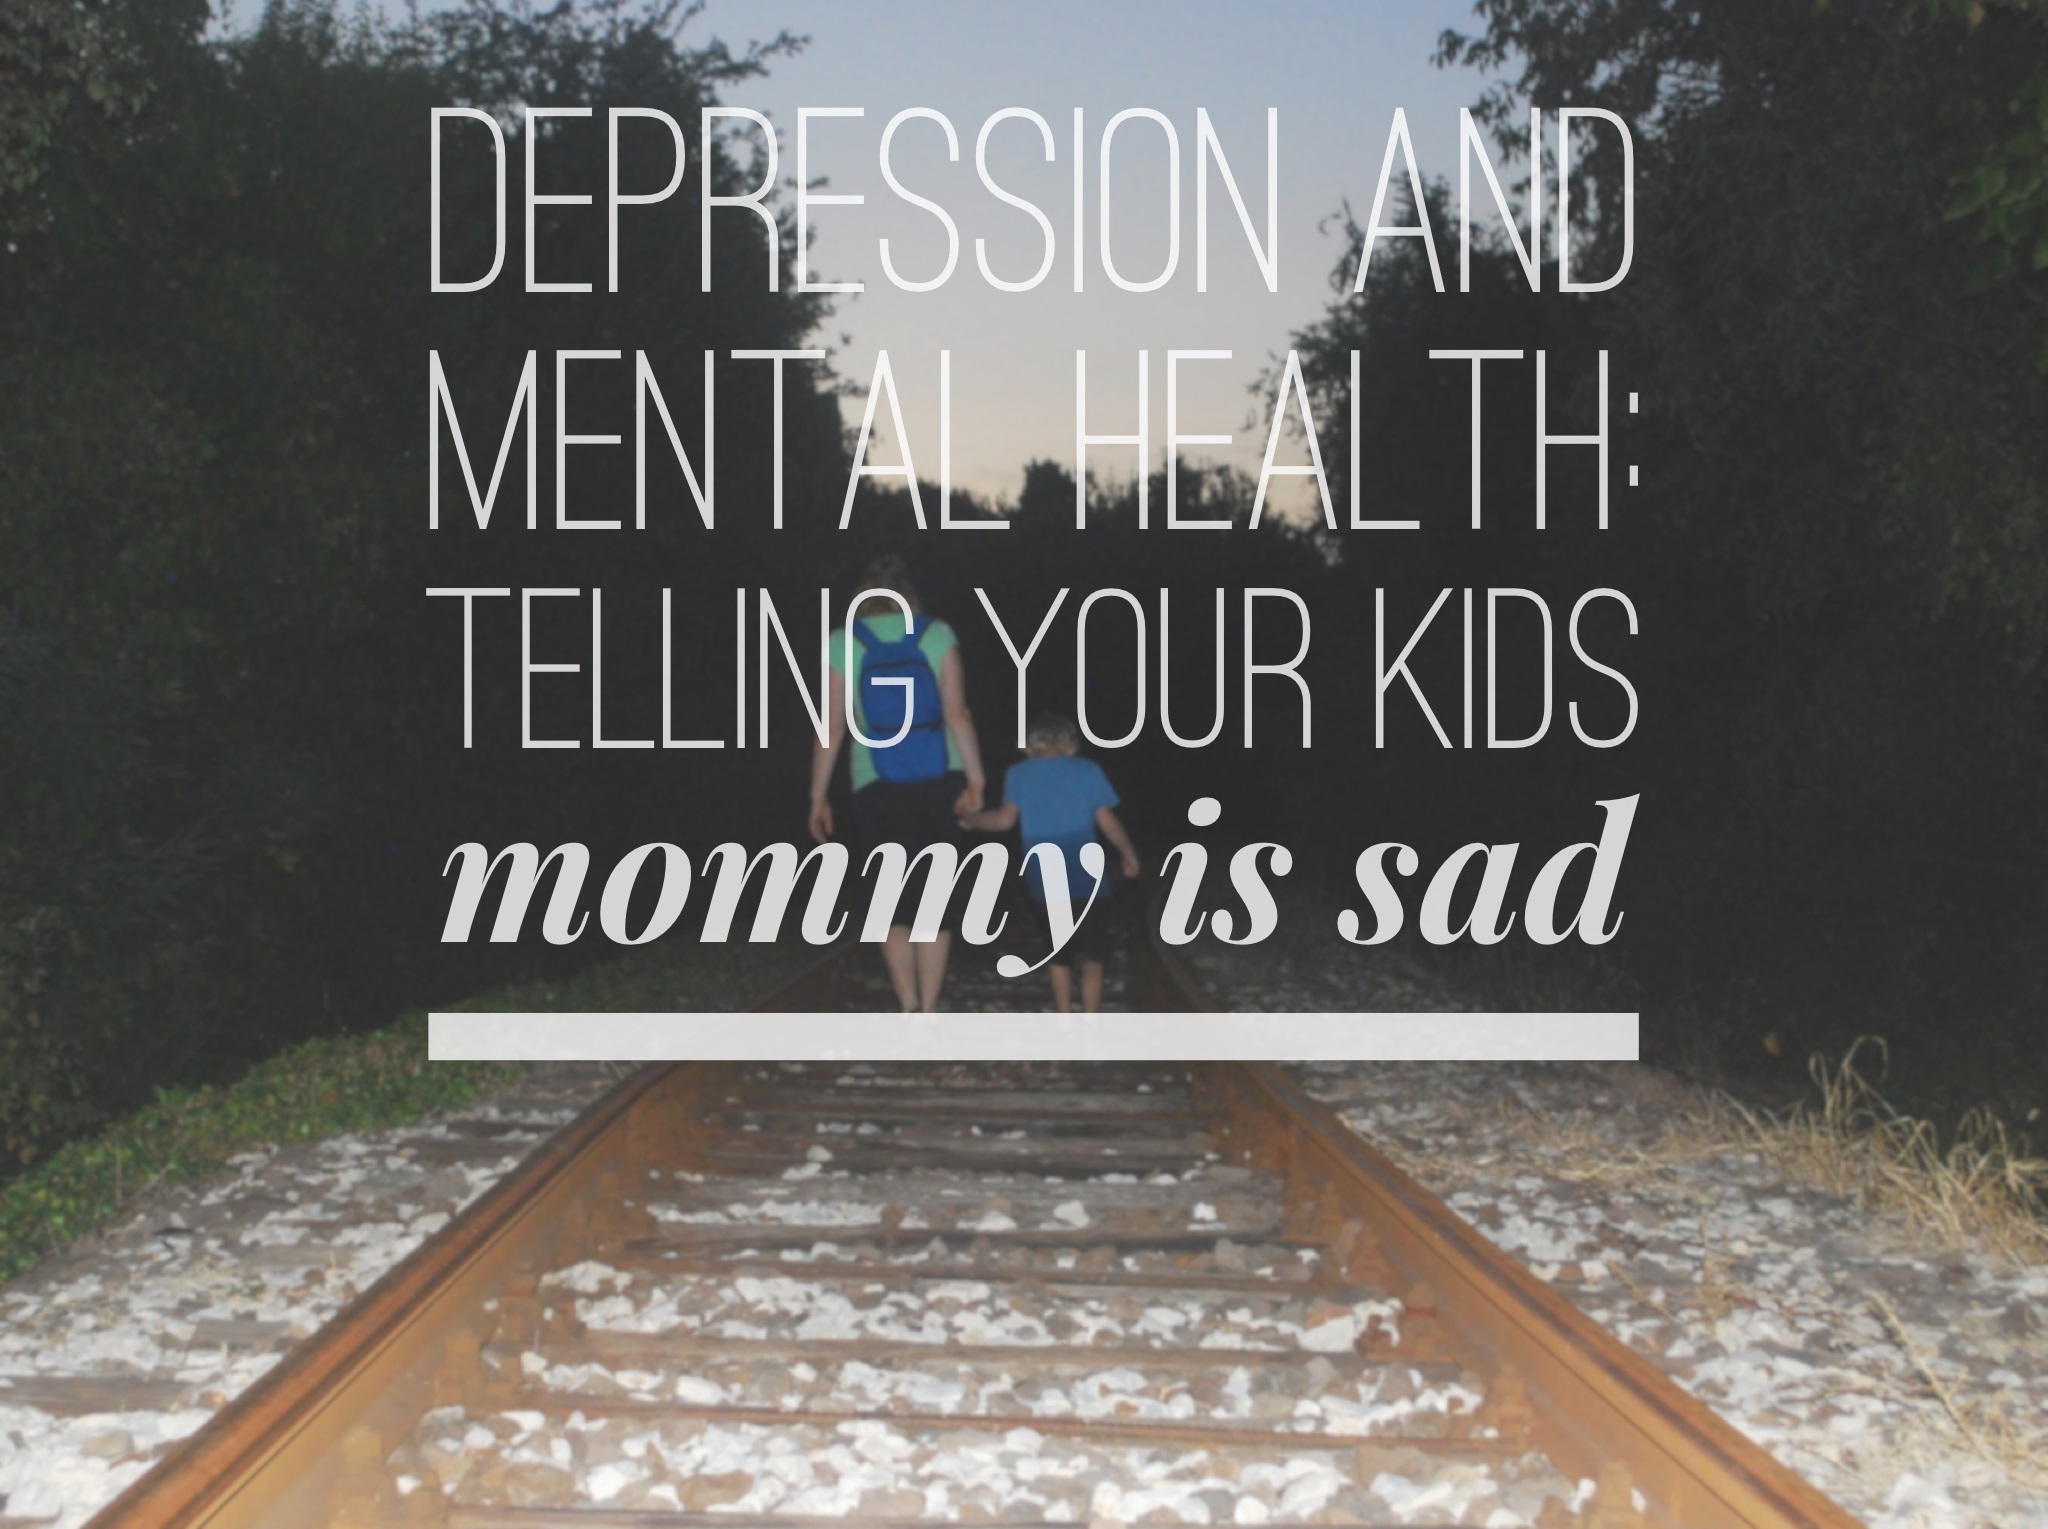 Depression and mental health telling your kids mommy is sad